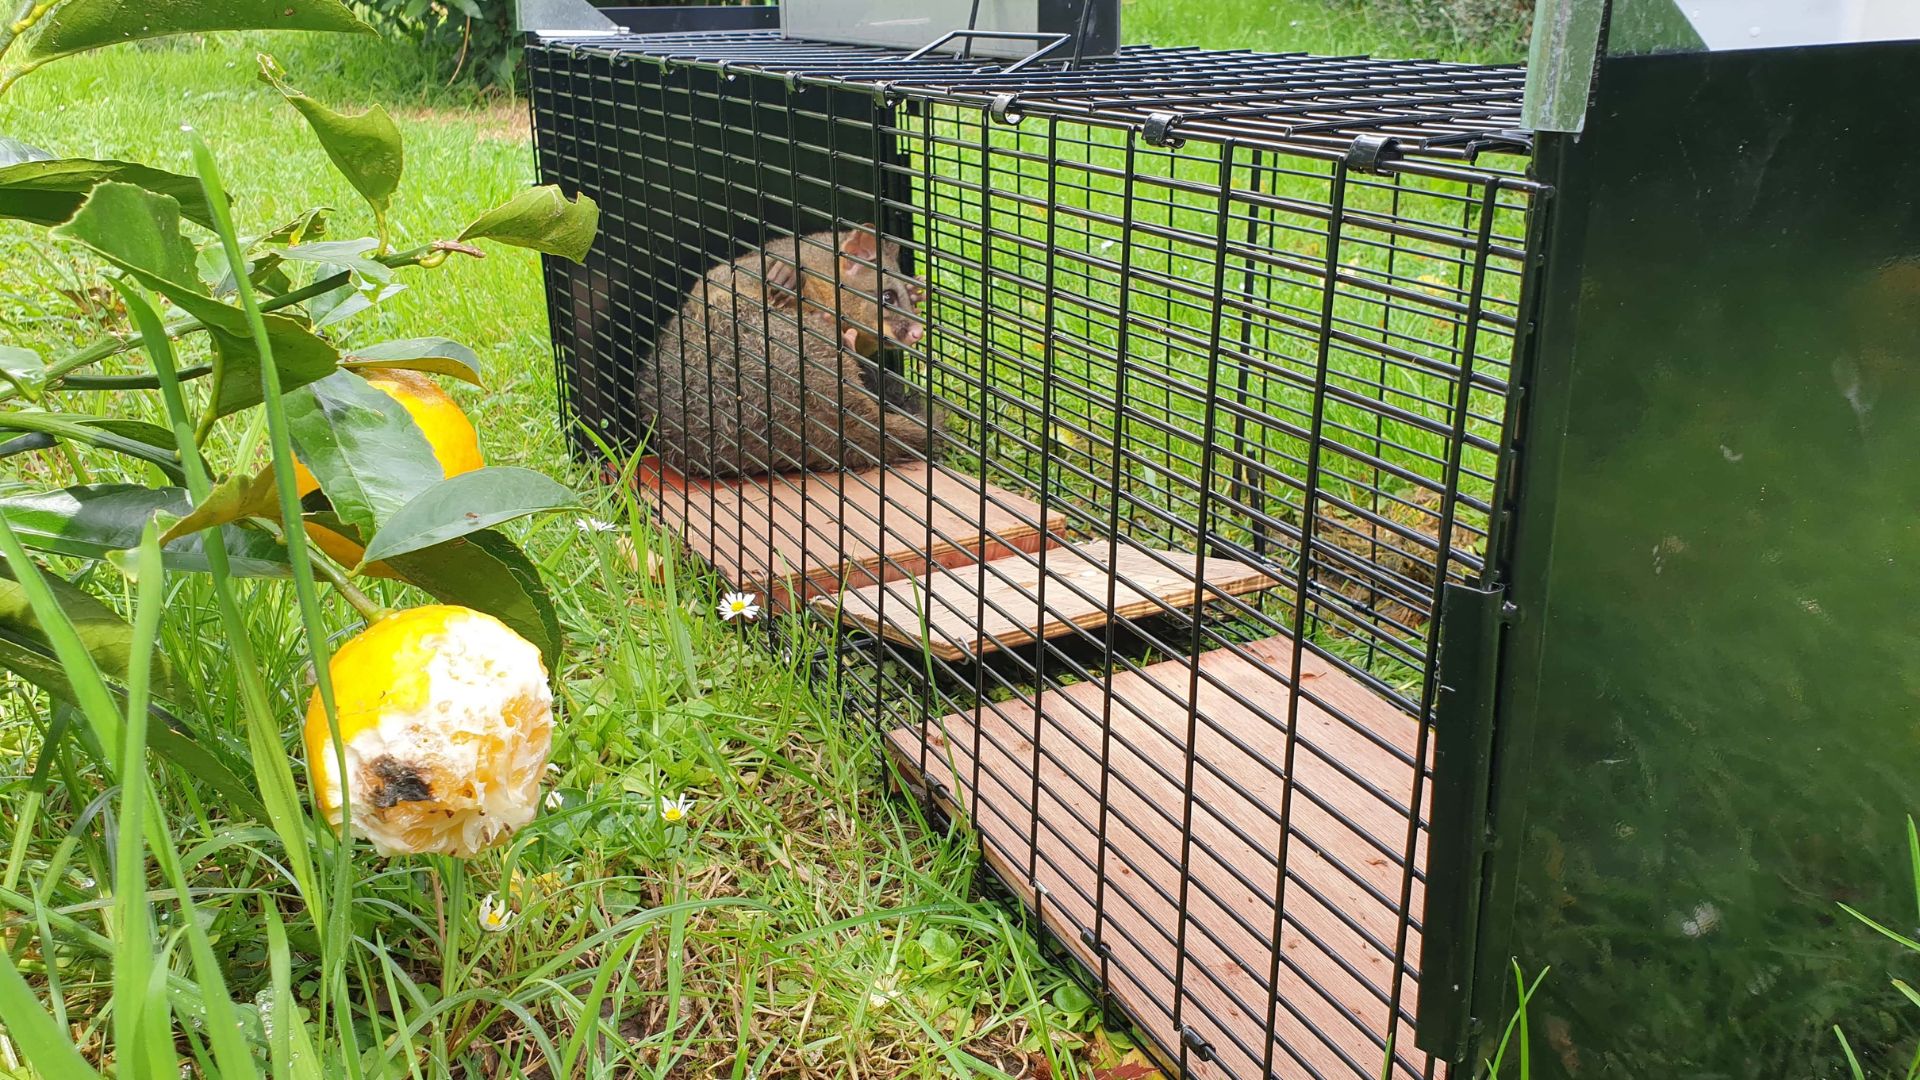 Possum trapped inside a Tāwhiti Smart Cage. A chewed up lemon in the foreground.